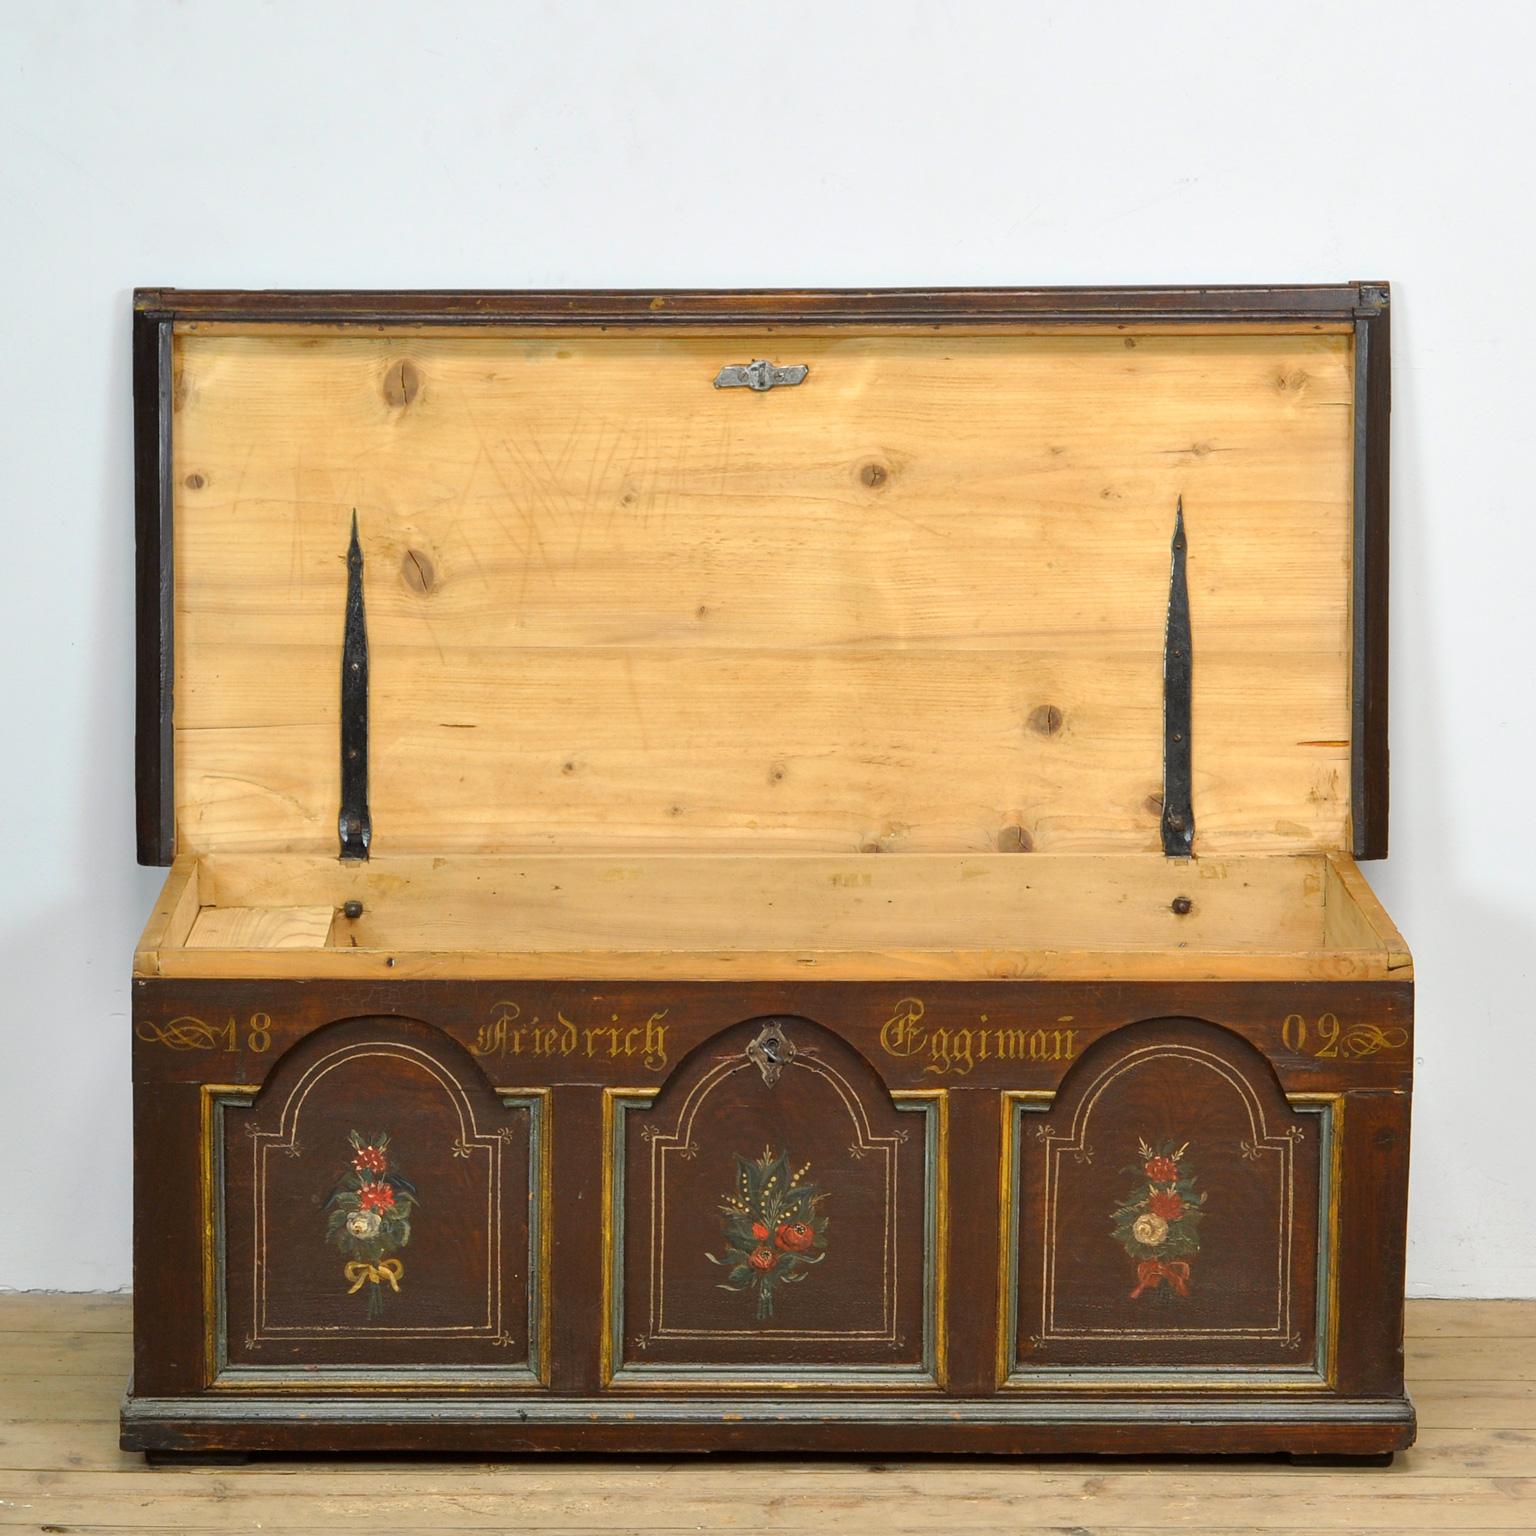 Hand-Painted Wedding Chest From 1802 For Sale